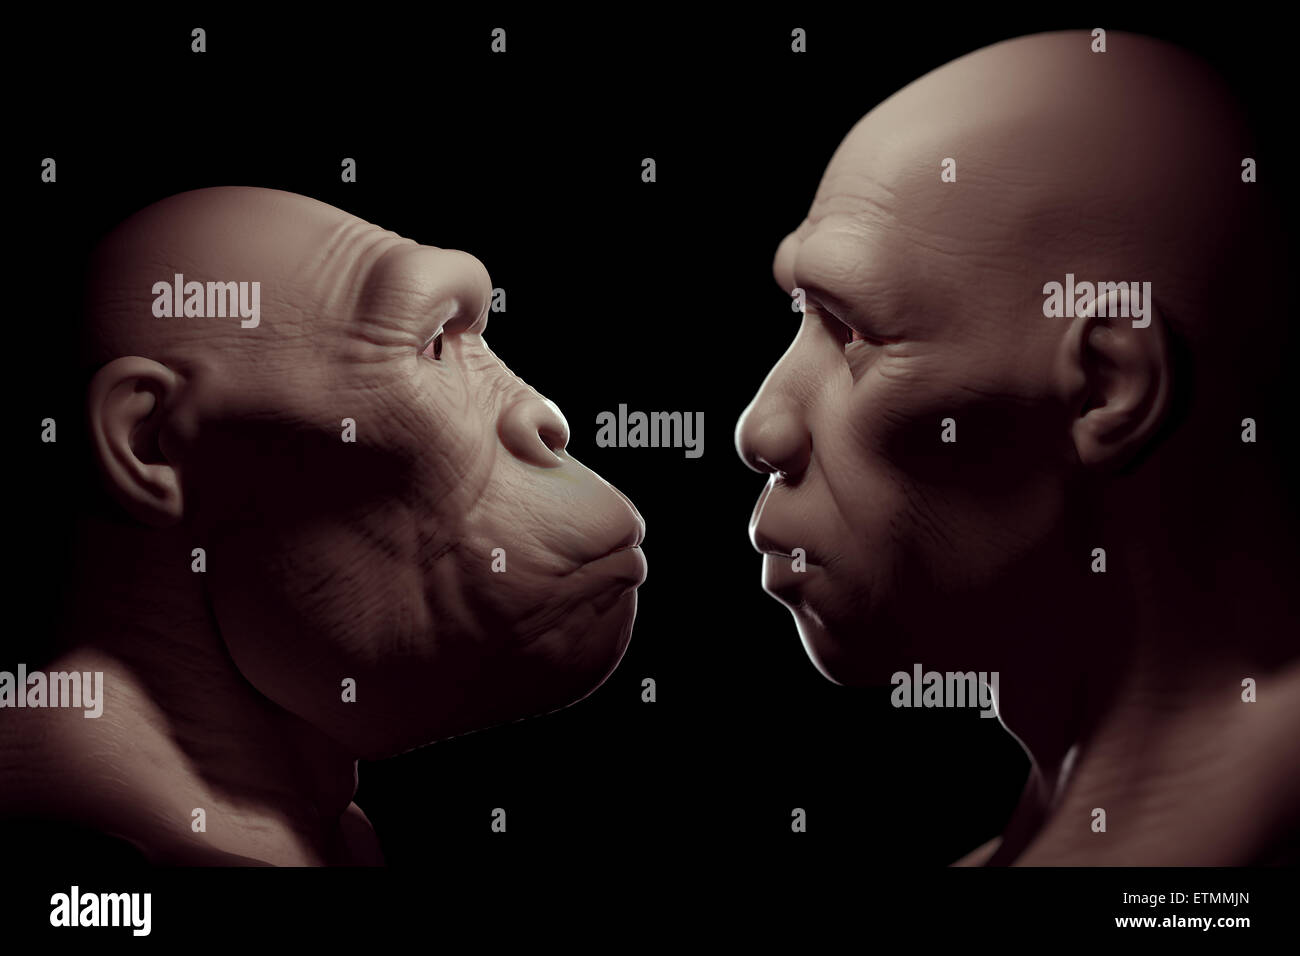 Depiction of an Australopithecus face to face with a Homo Sapiens.  Australopithecus is an extinct genus of hominids and early ancestor to Homo Sapiens. Stock Photo